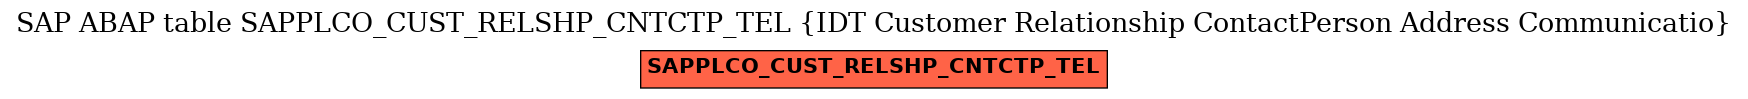 E-R Diagram for table SAPPLCO_CUST_RELSHP_CNTCTP_TEL (IDT Customer Relationship ContactPerson Address Communicatio)